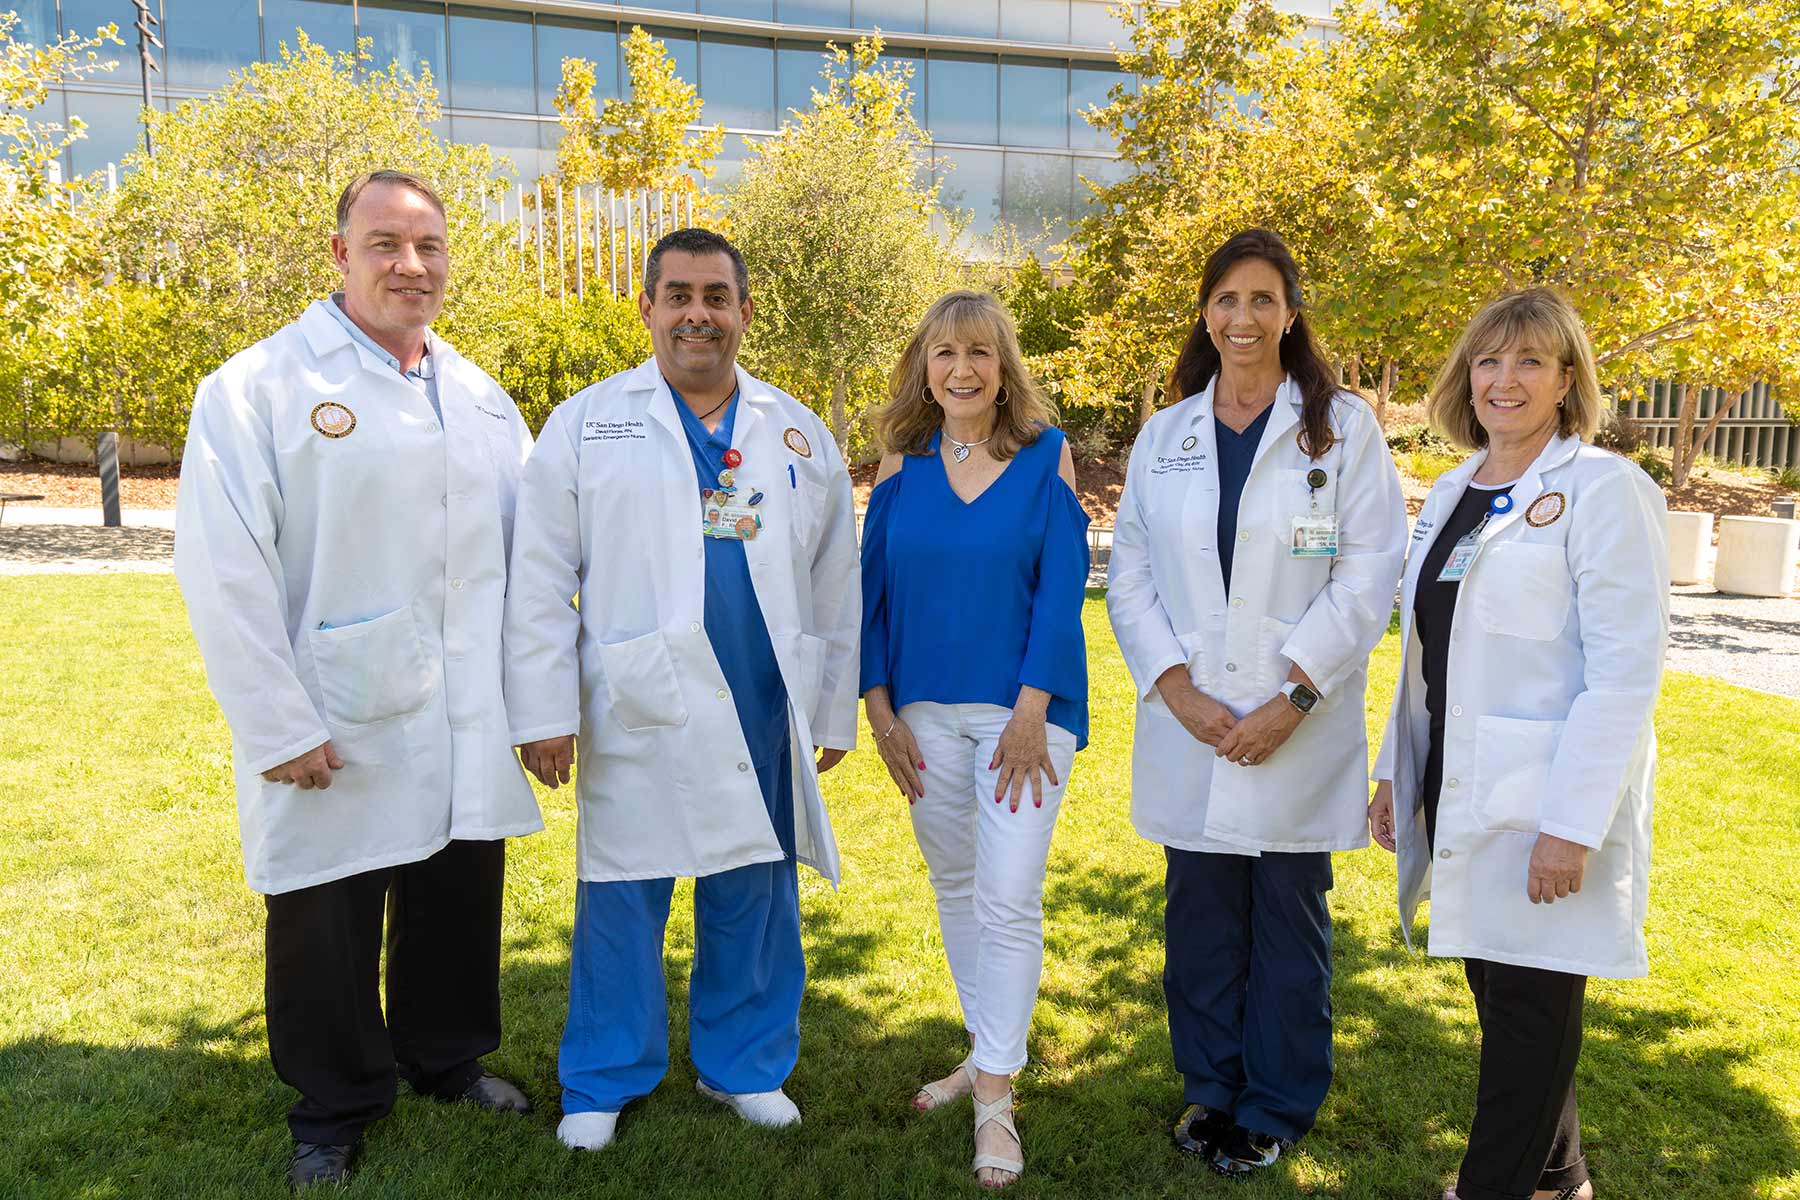 Susan Nelson with the team of Geriatric Emergency Nurse Initiative Experts at UC San Diego Health.